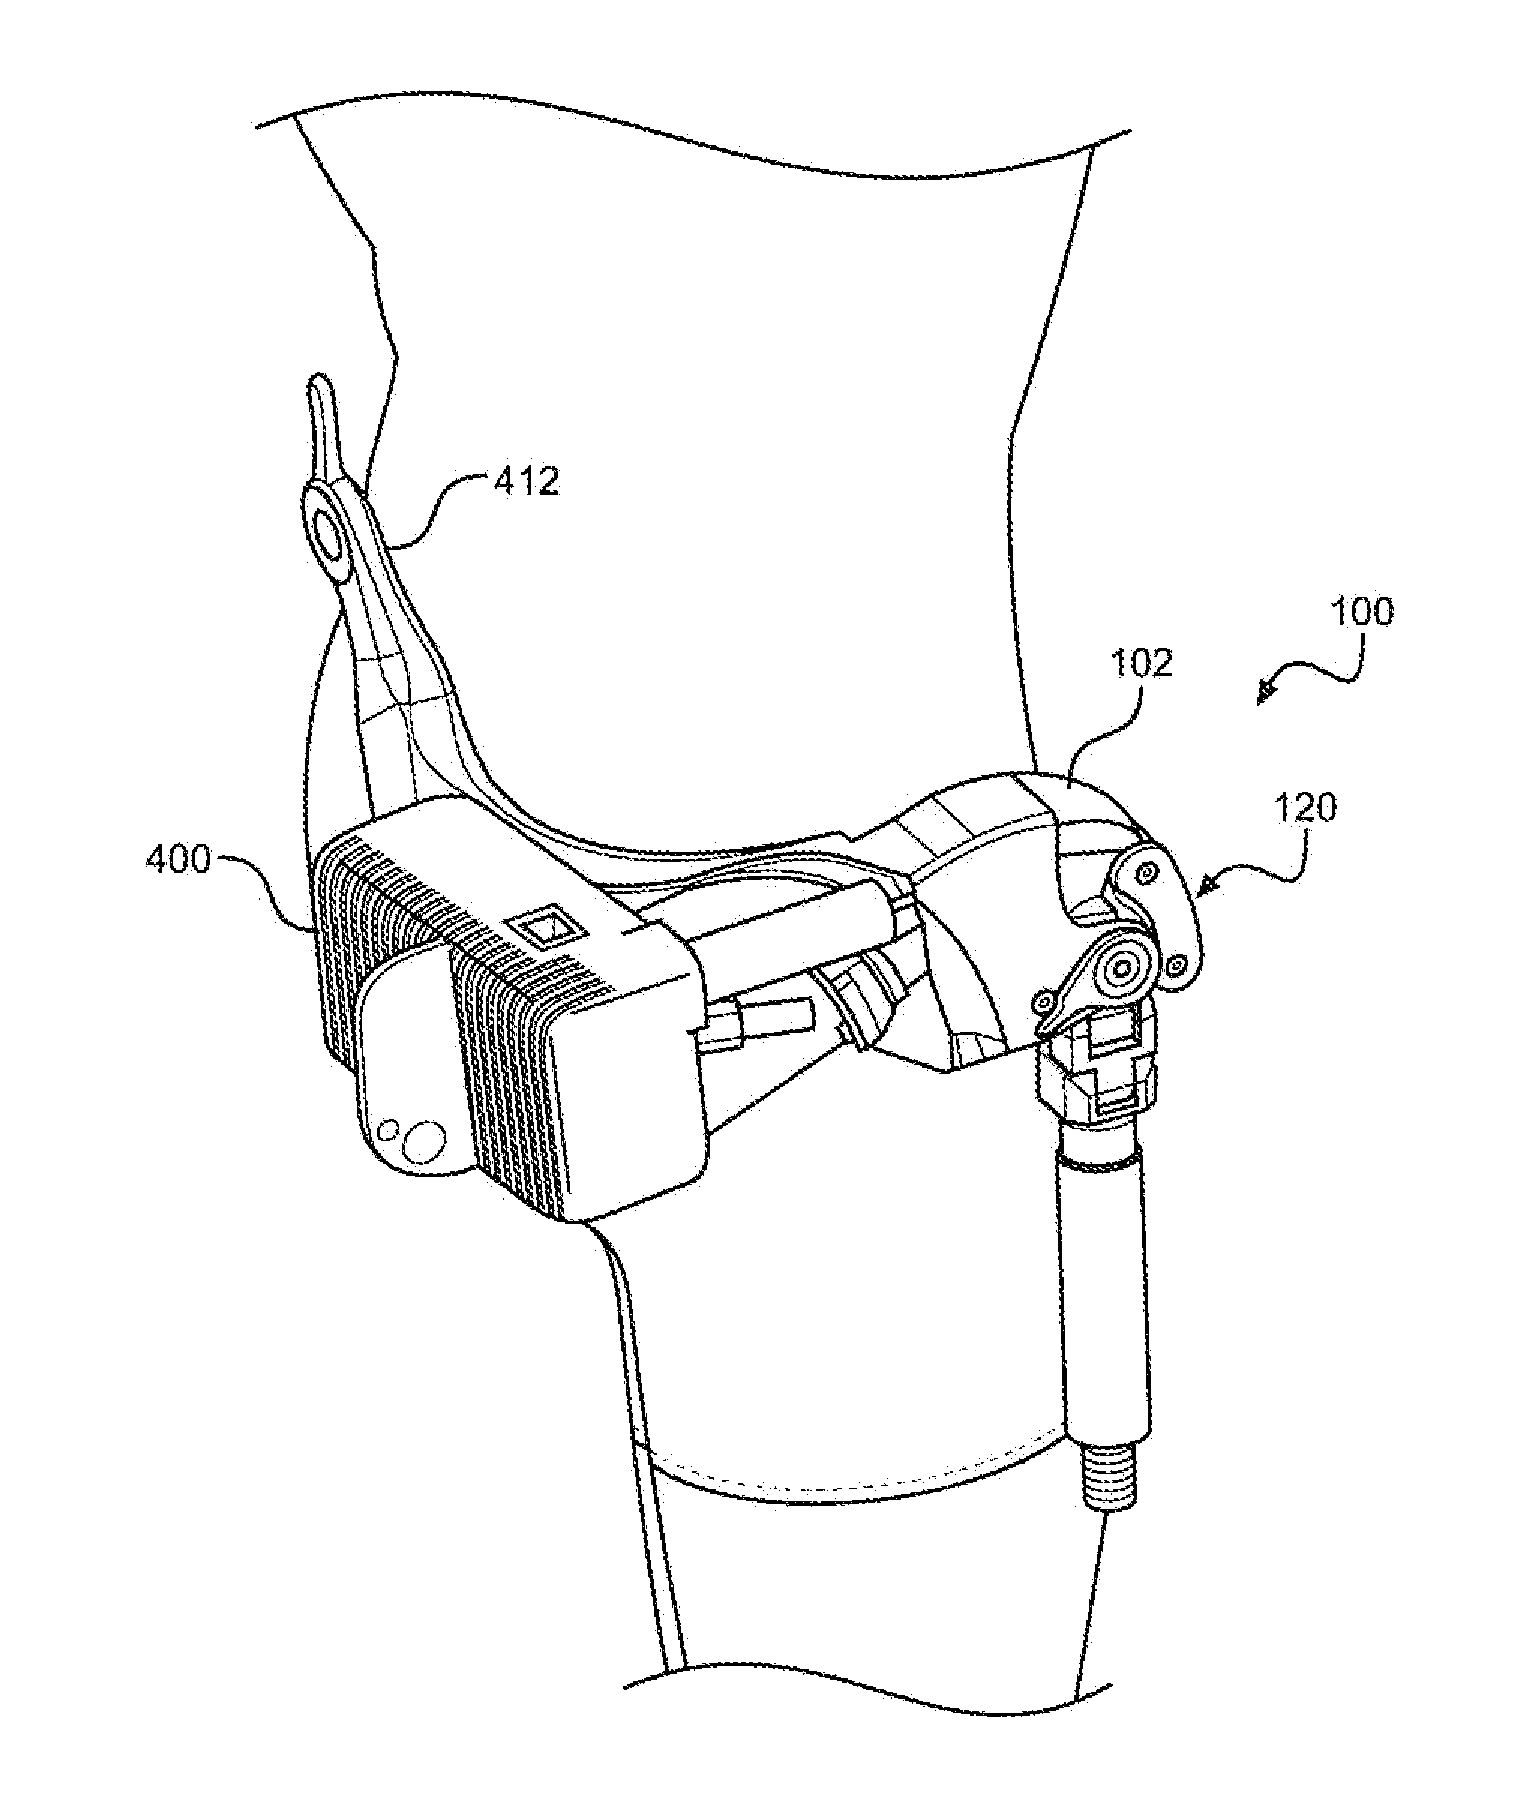 Hip and Knee Actuation Systems for Lower Limb Orthotic Devices